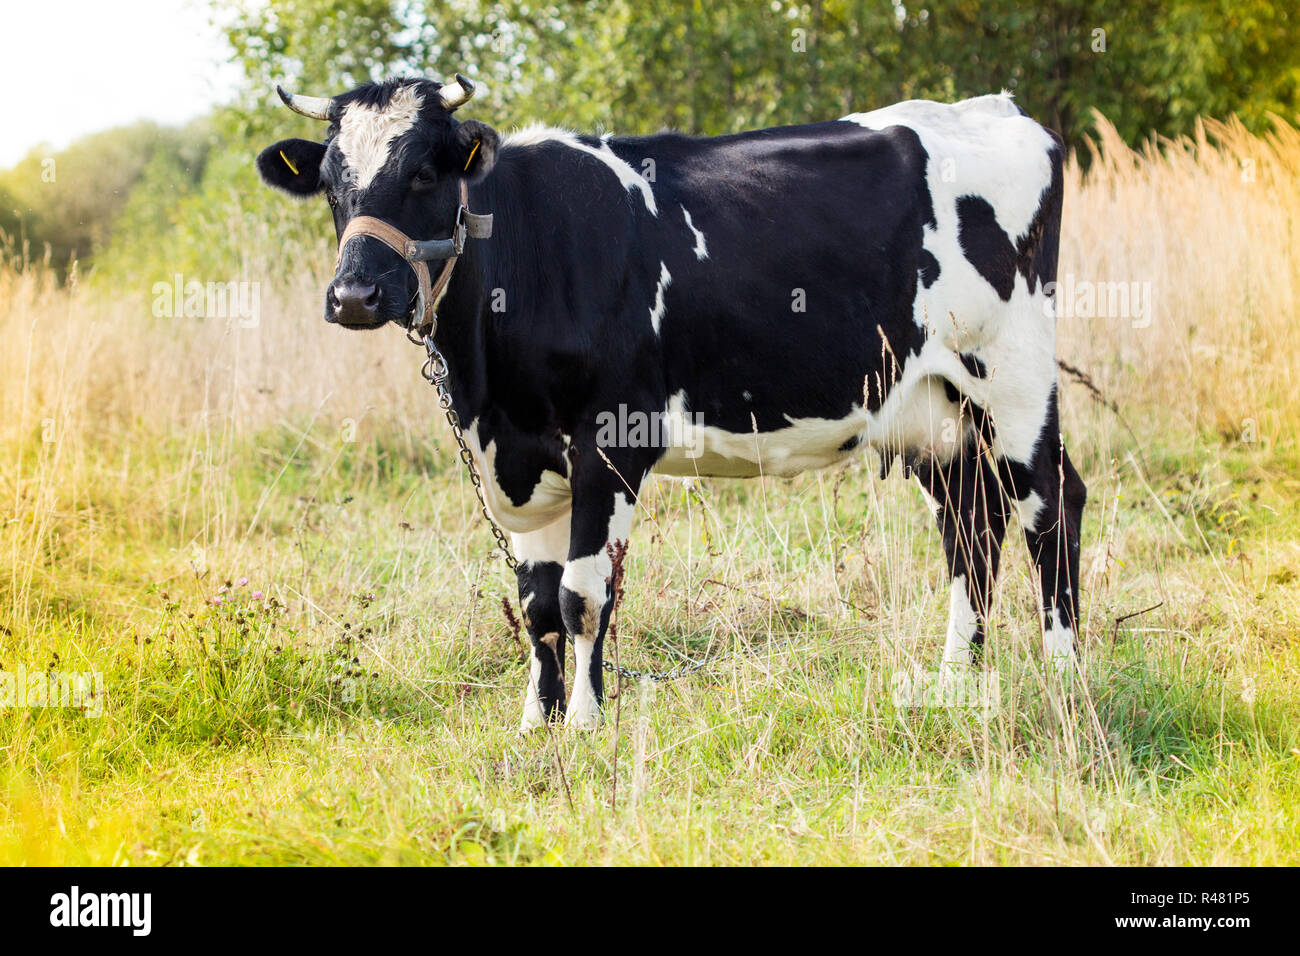 Black and white cow standing in a field Stock Photo